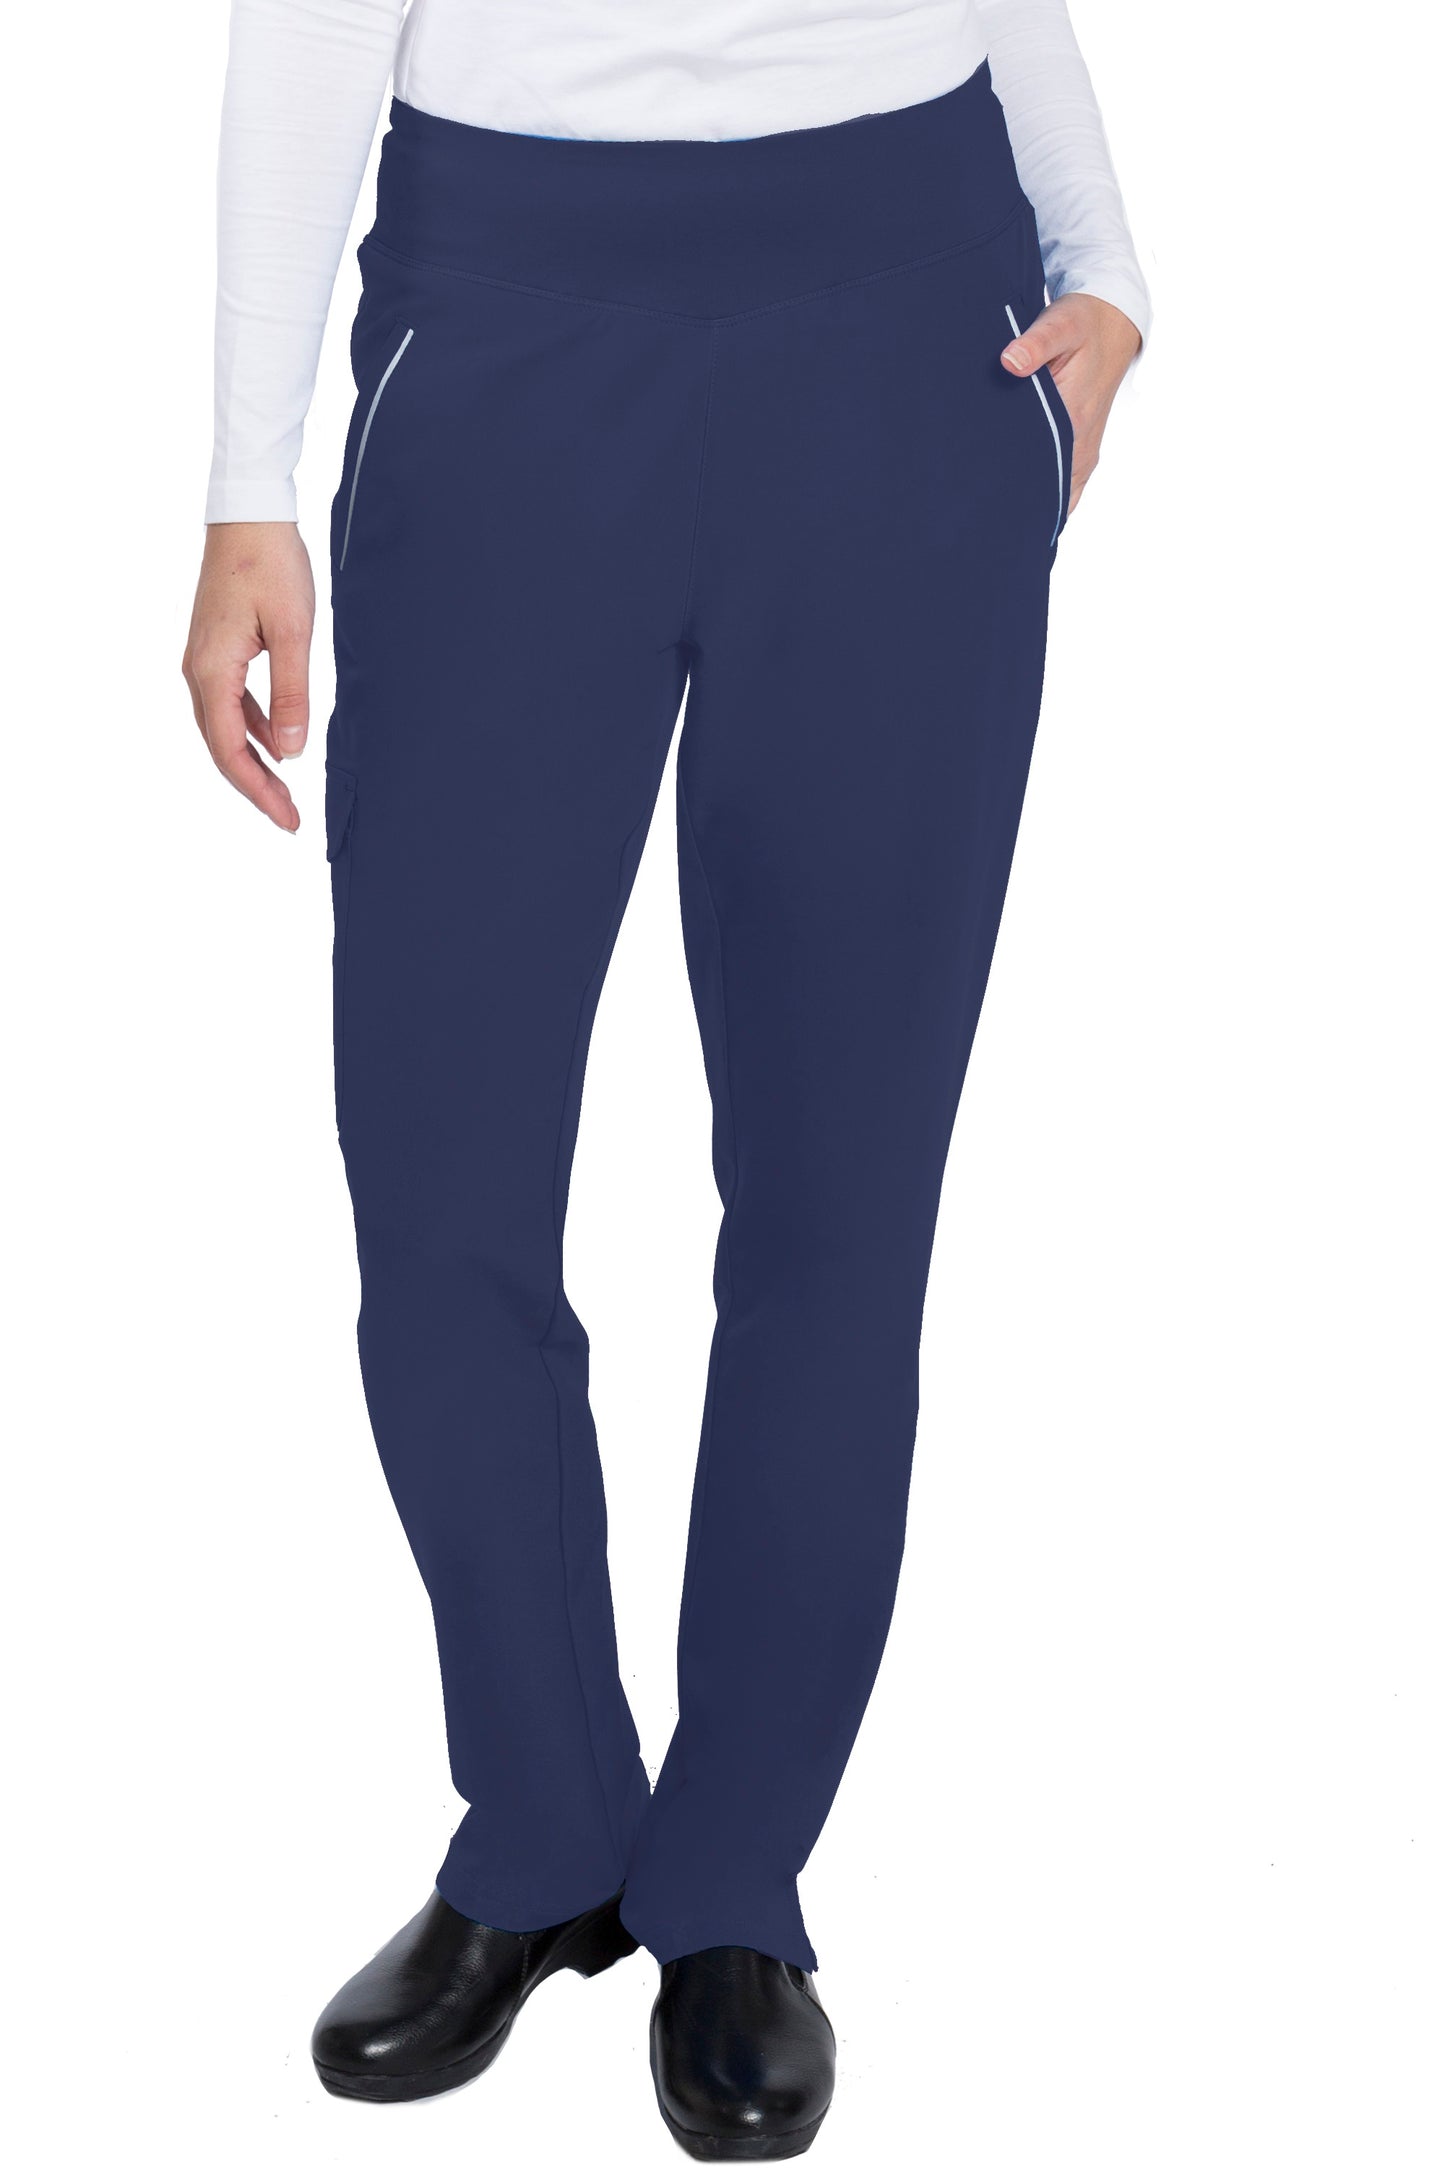 Healing Hands HH360 Naomi Yoga Waist Scrub Pant in Navy at Parker's Clothing and Shoes.